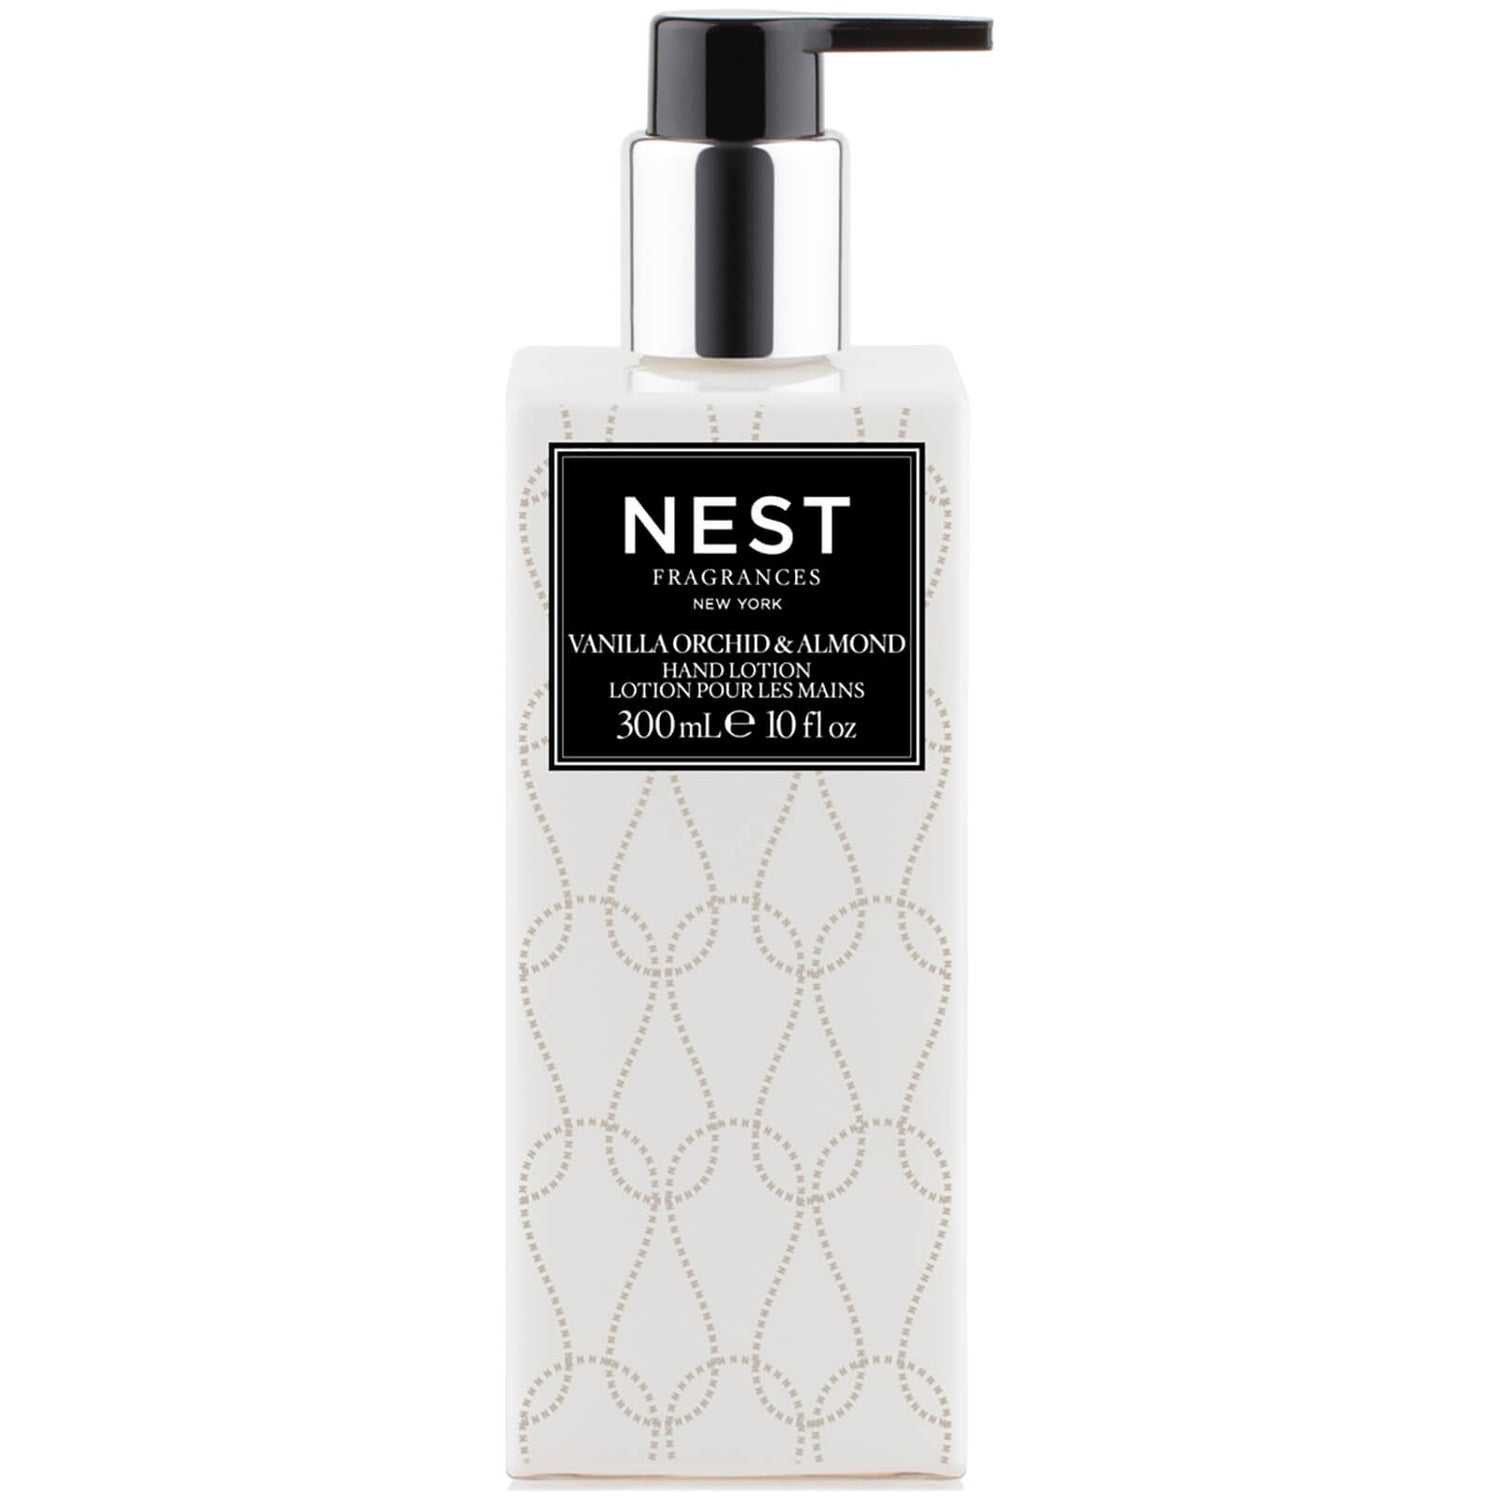 NEST Fragrances Vanilla Orchid and Almond Hand Lotion